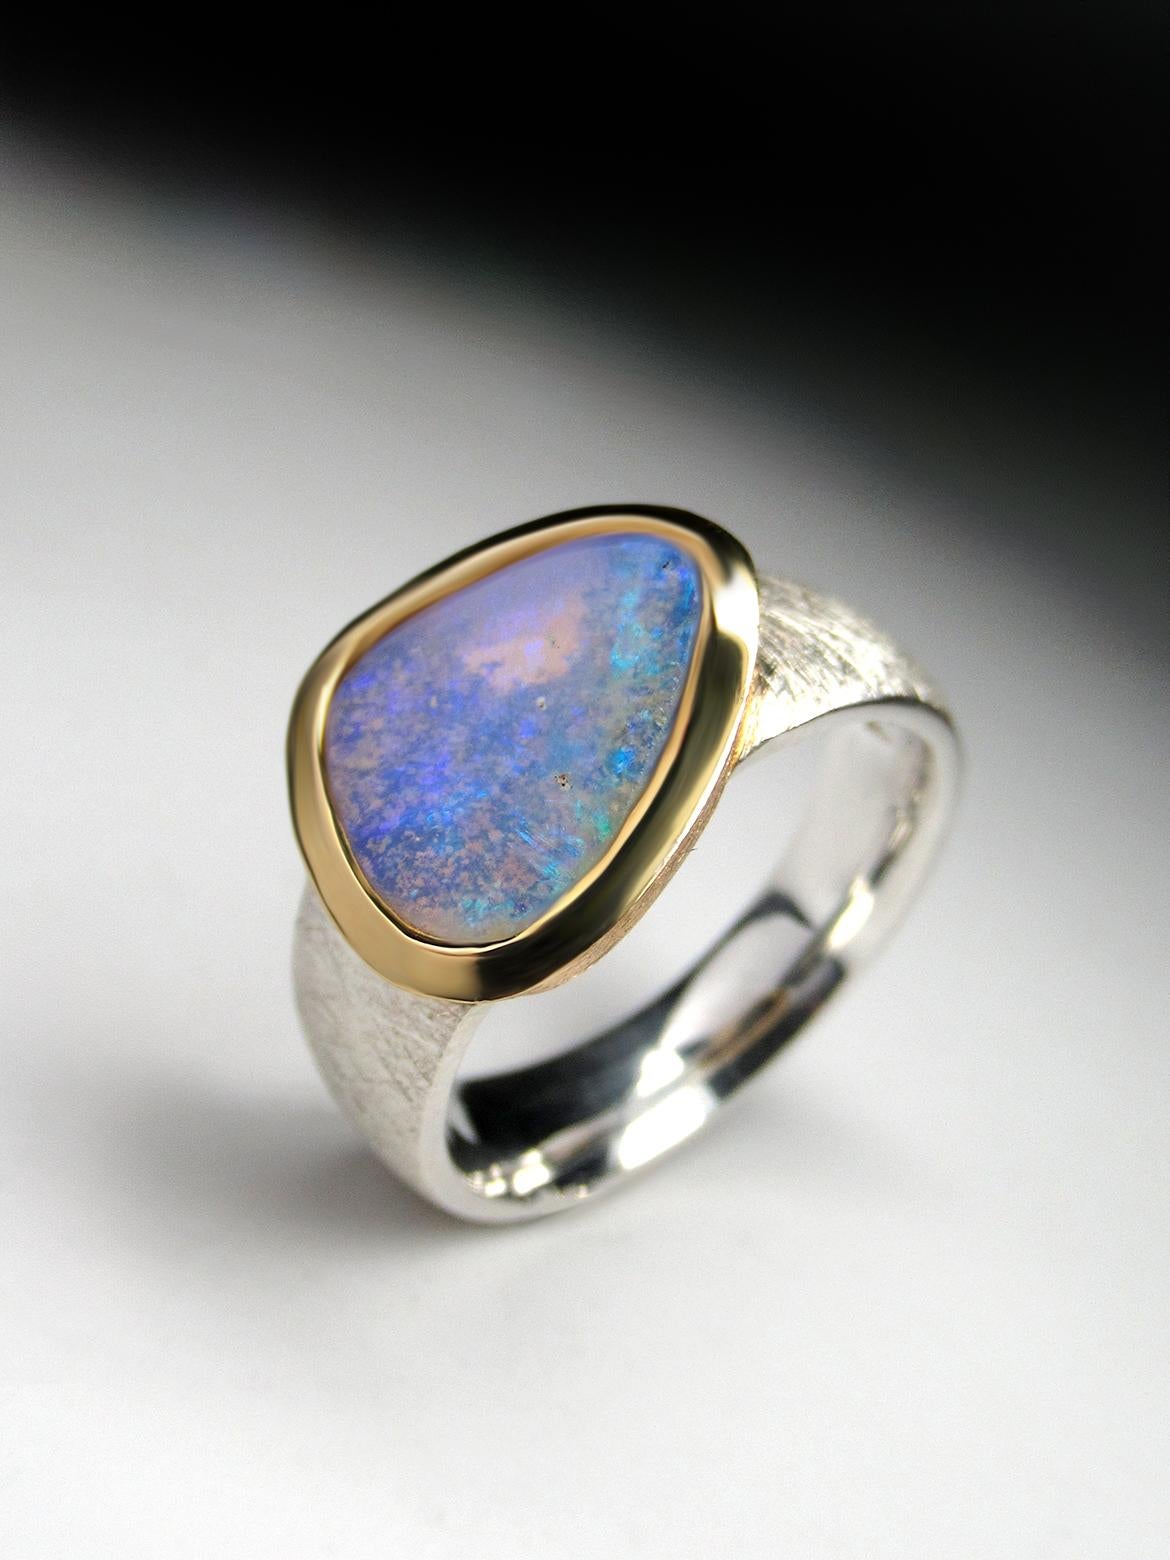 Australian Crystal Opal Ring Silver 18K Gold neon wedding anniversary For Sale 4